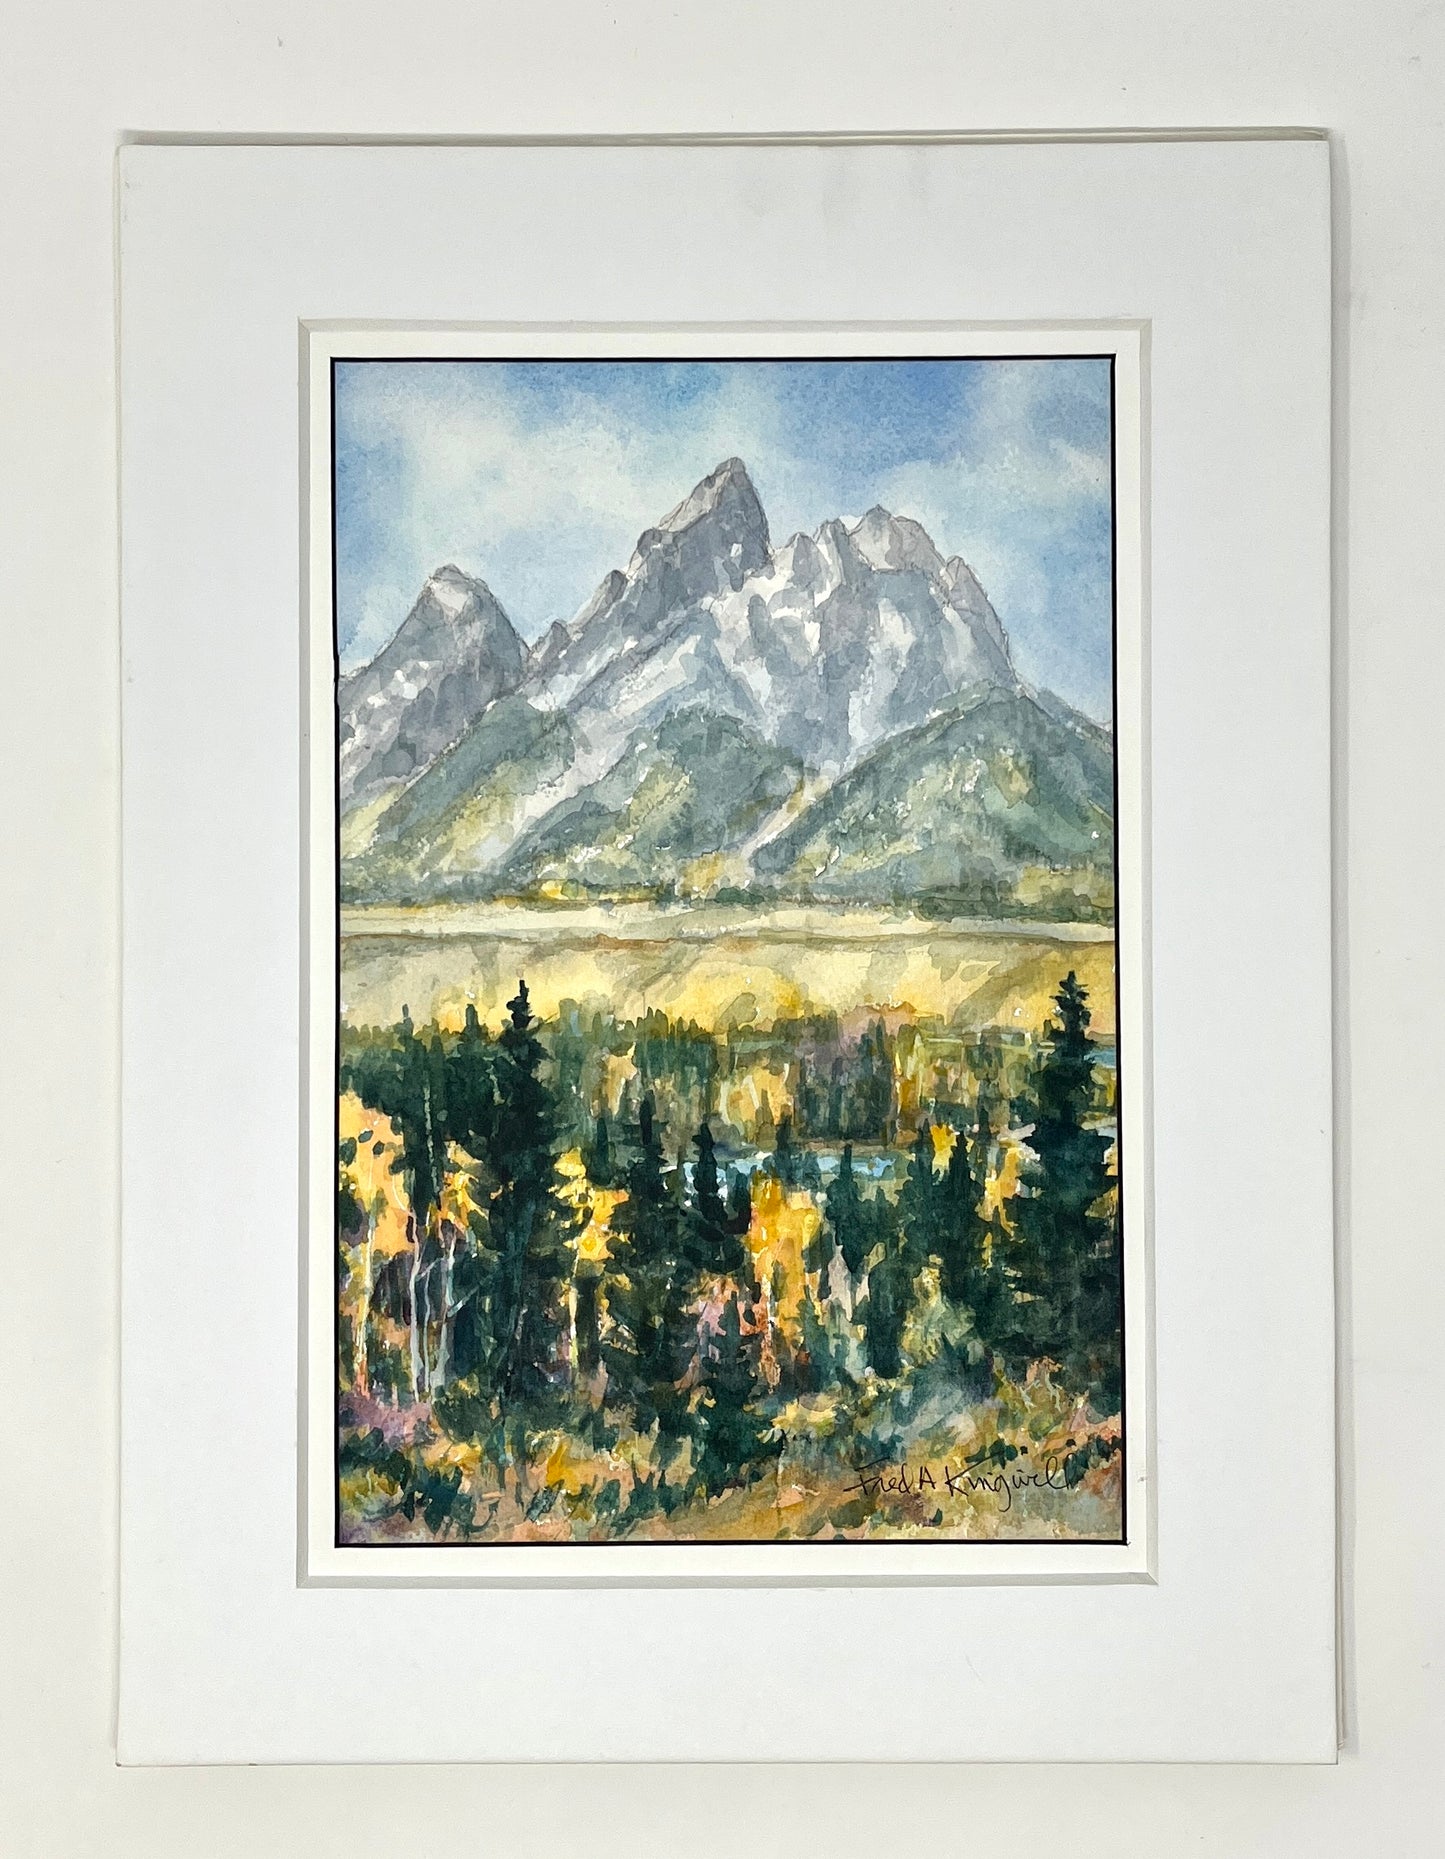 Fred Kingwill: Tetons Changing Colors